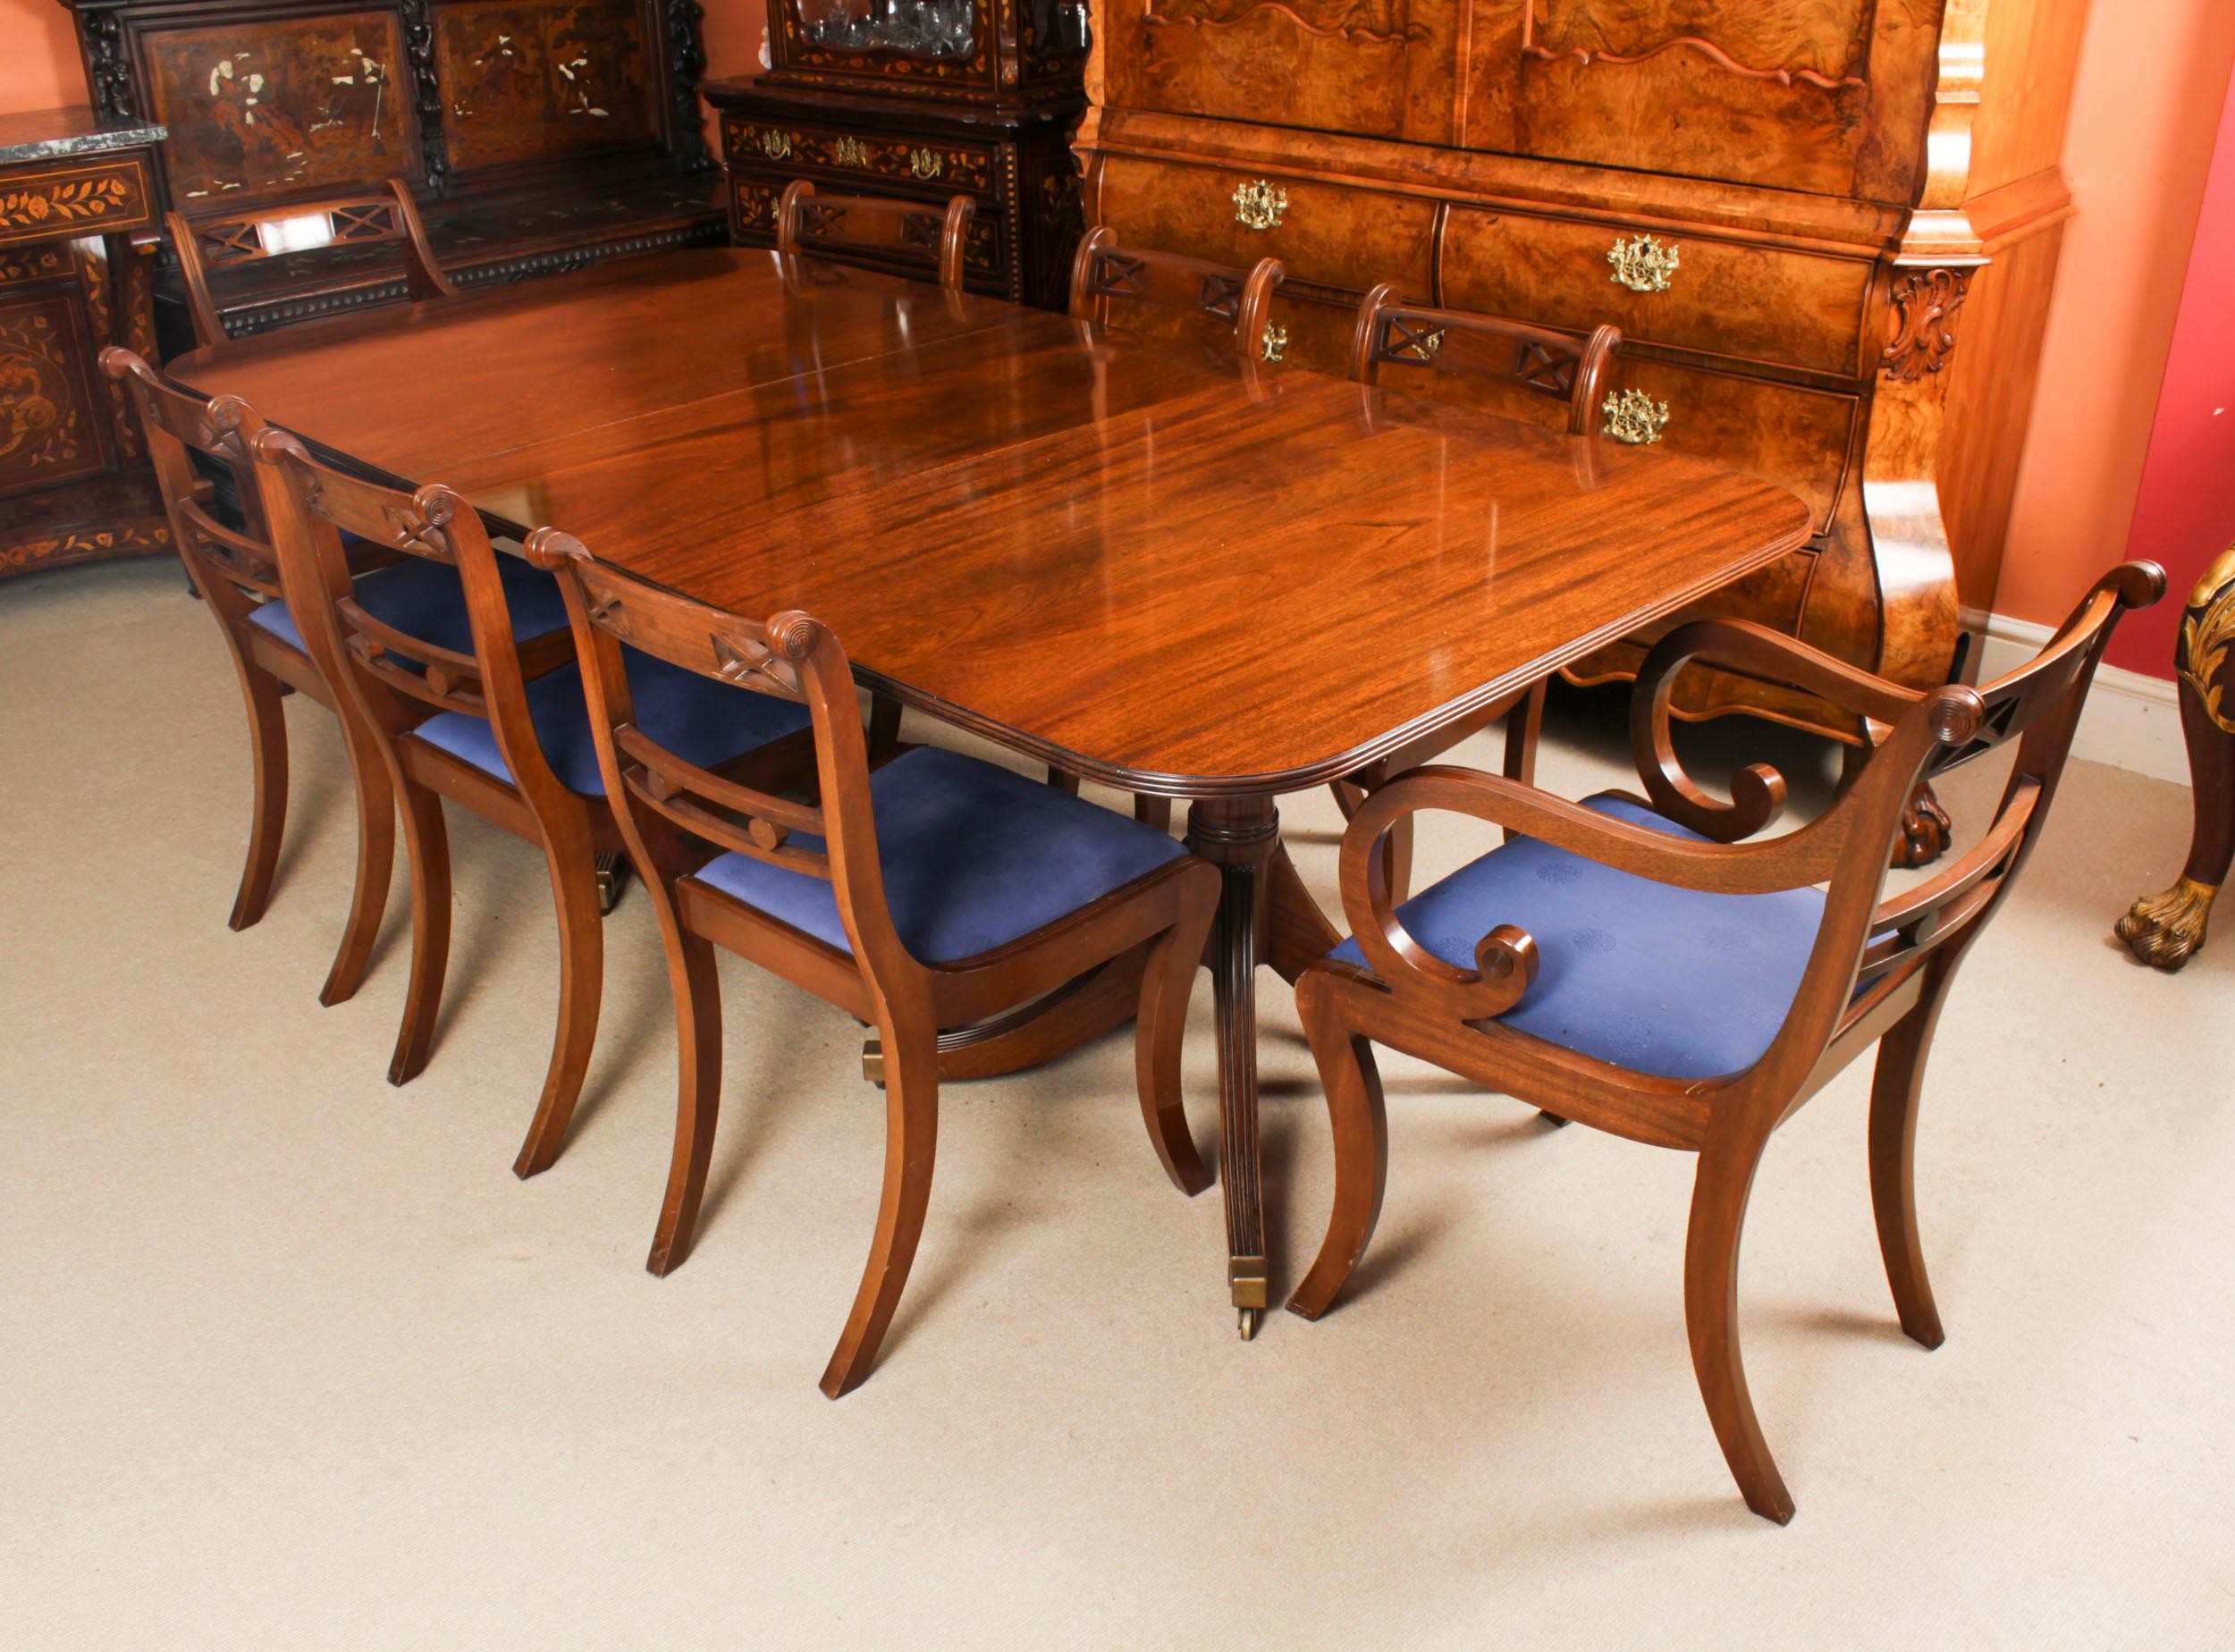 This is  a fabulous Vintage Regency Revival twin pillar dining table Hand Crafted by Mines of Downley, Buckinghamshire, England, dating from the mid 20th Century.

The table is made of stunning solid flame mahogany and is raised on twin 